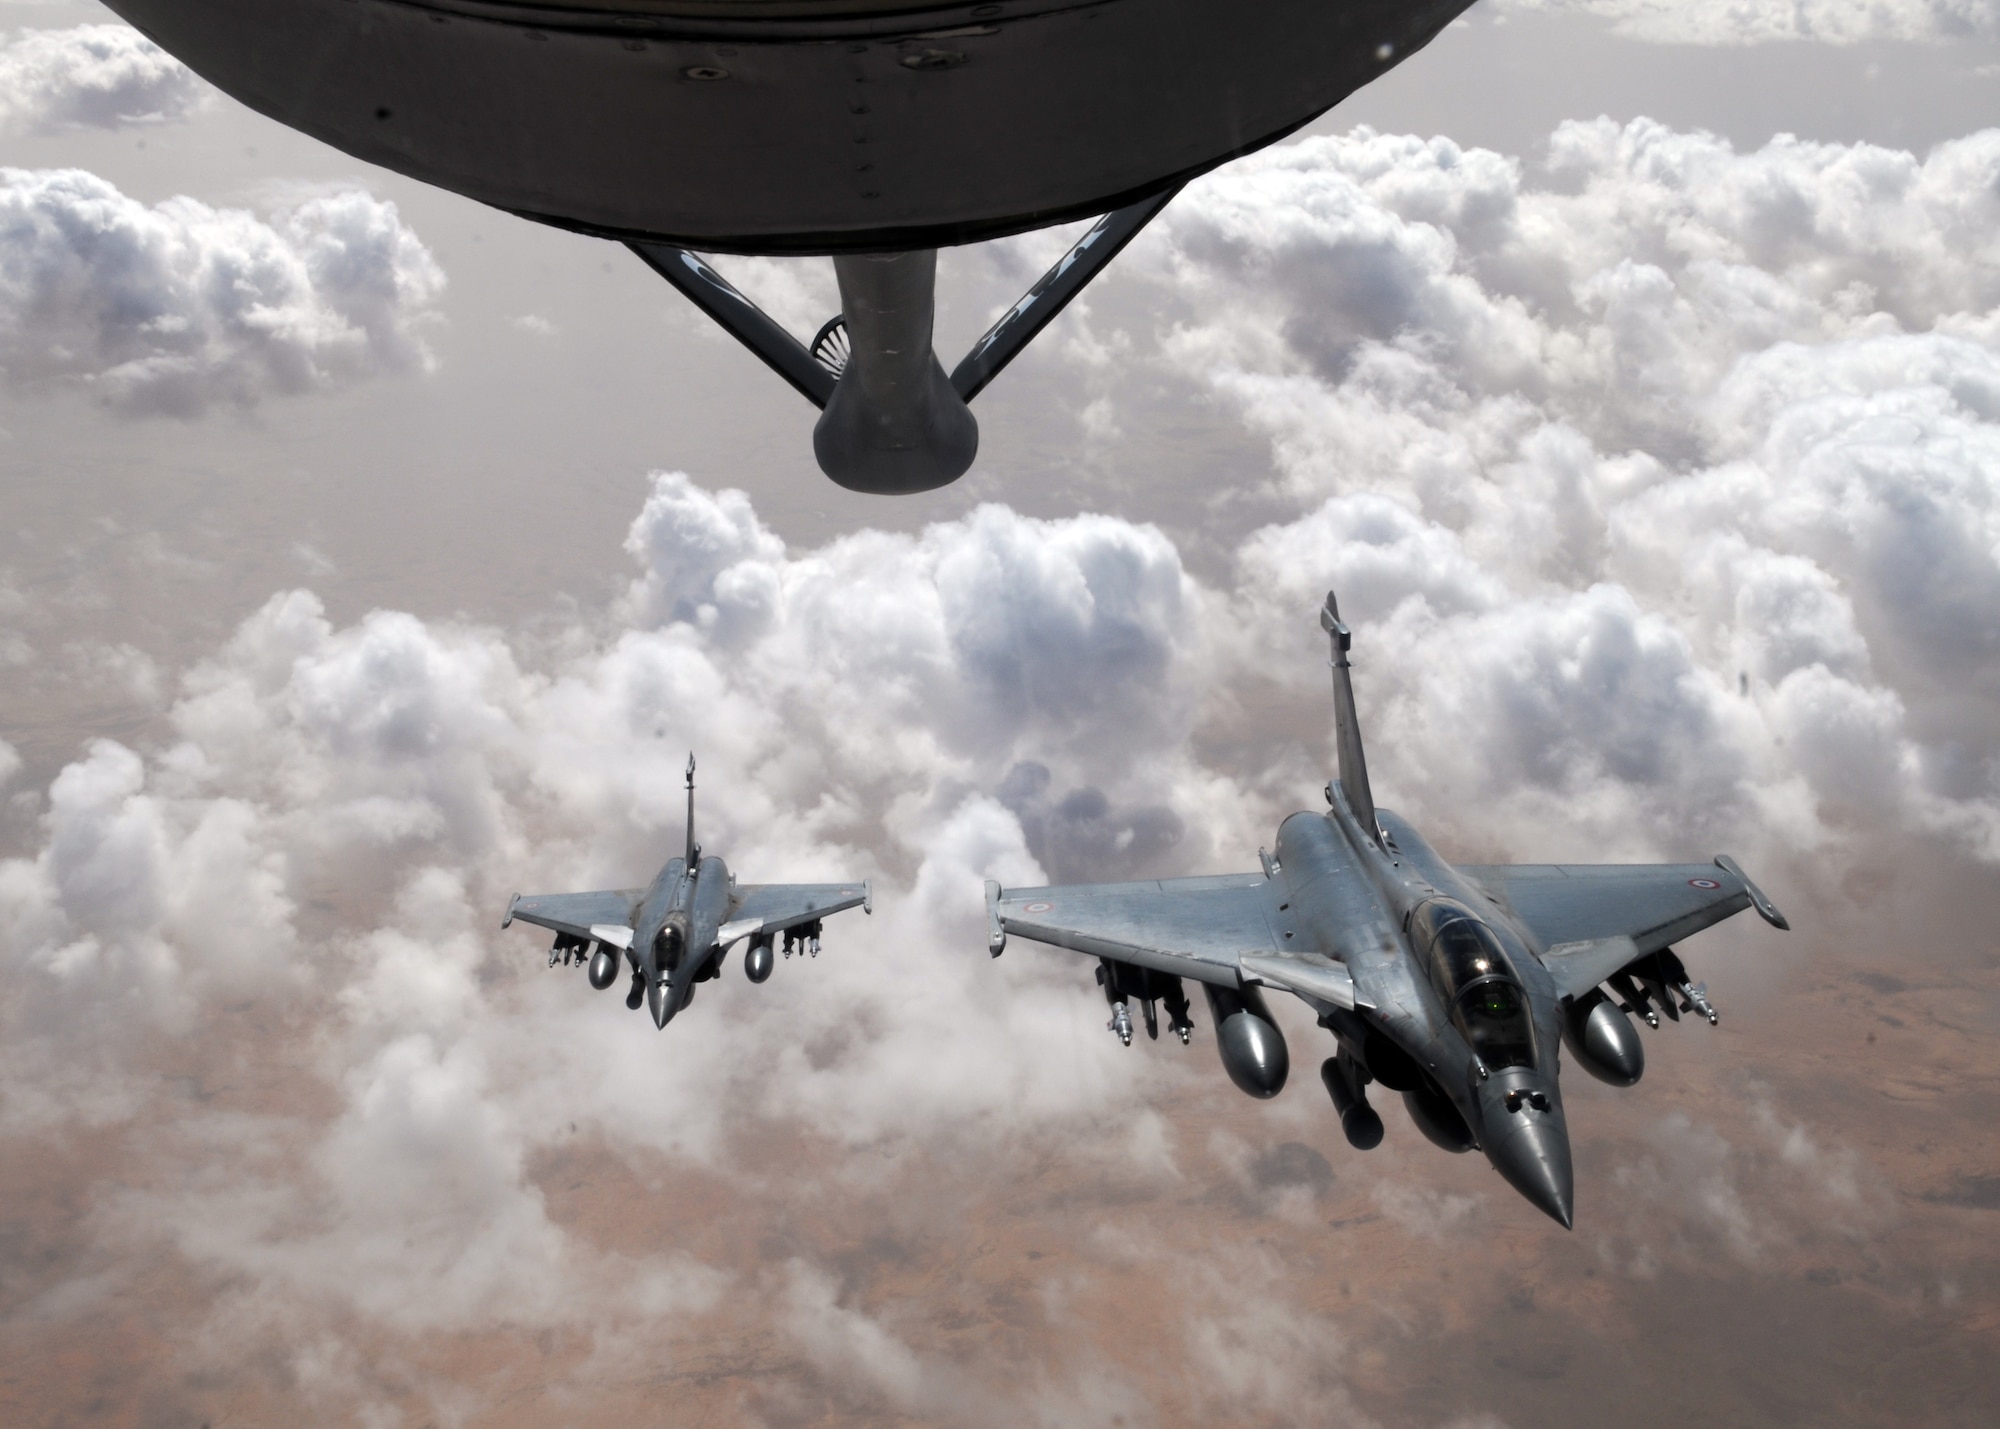 Two French Rafale fighter aircraft prepare to break formation after refueling with a KC-135 Stratotanker April 23, 2013, over Mali. The Stratotankers are from the 100th Air Refueling Wing at RAF Mildenhall, England, and are currently operated by the 100th’s forward deployed unit, the 351st Expeditionary Air Refueling Squadron. (U.S. Air Force photo by 1st Lt. Christopher Mesnard/Released)